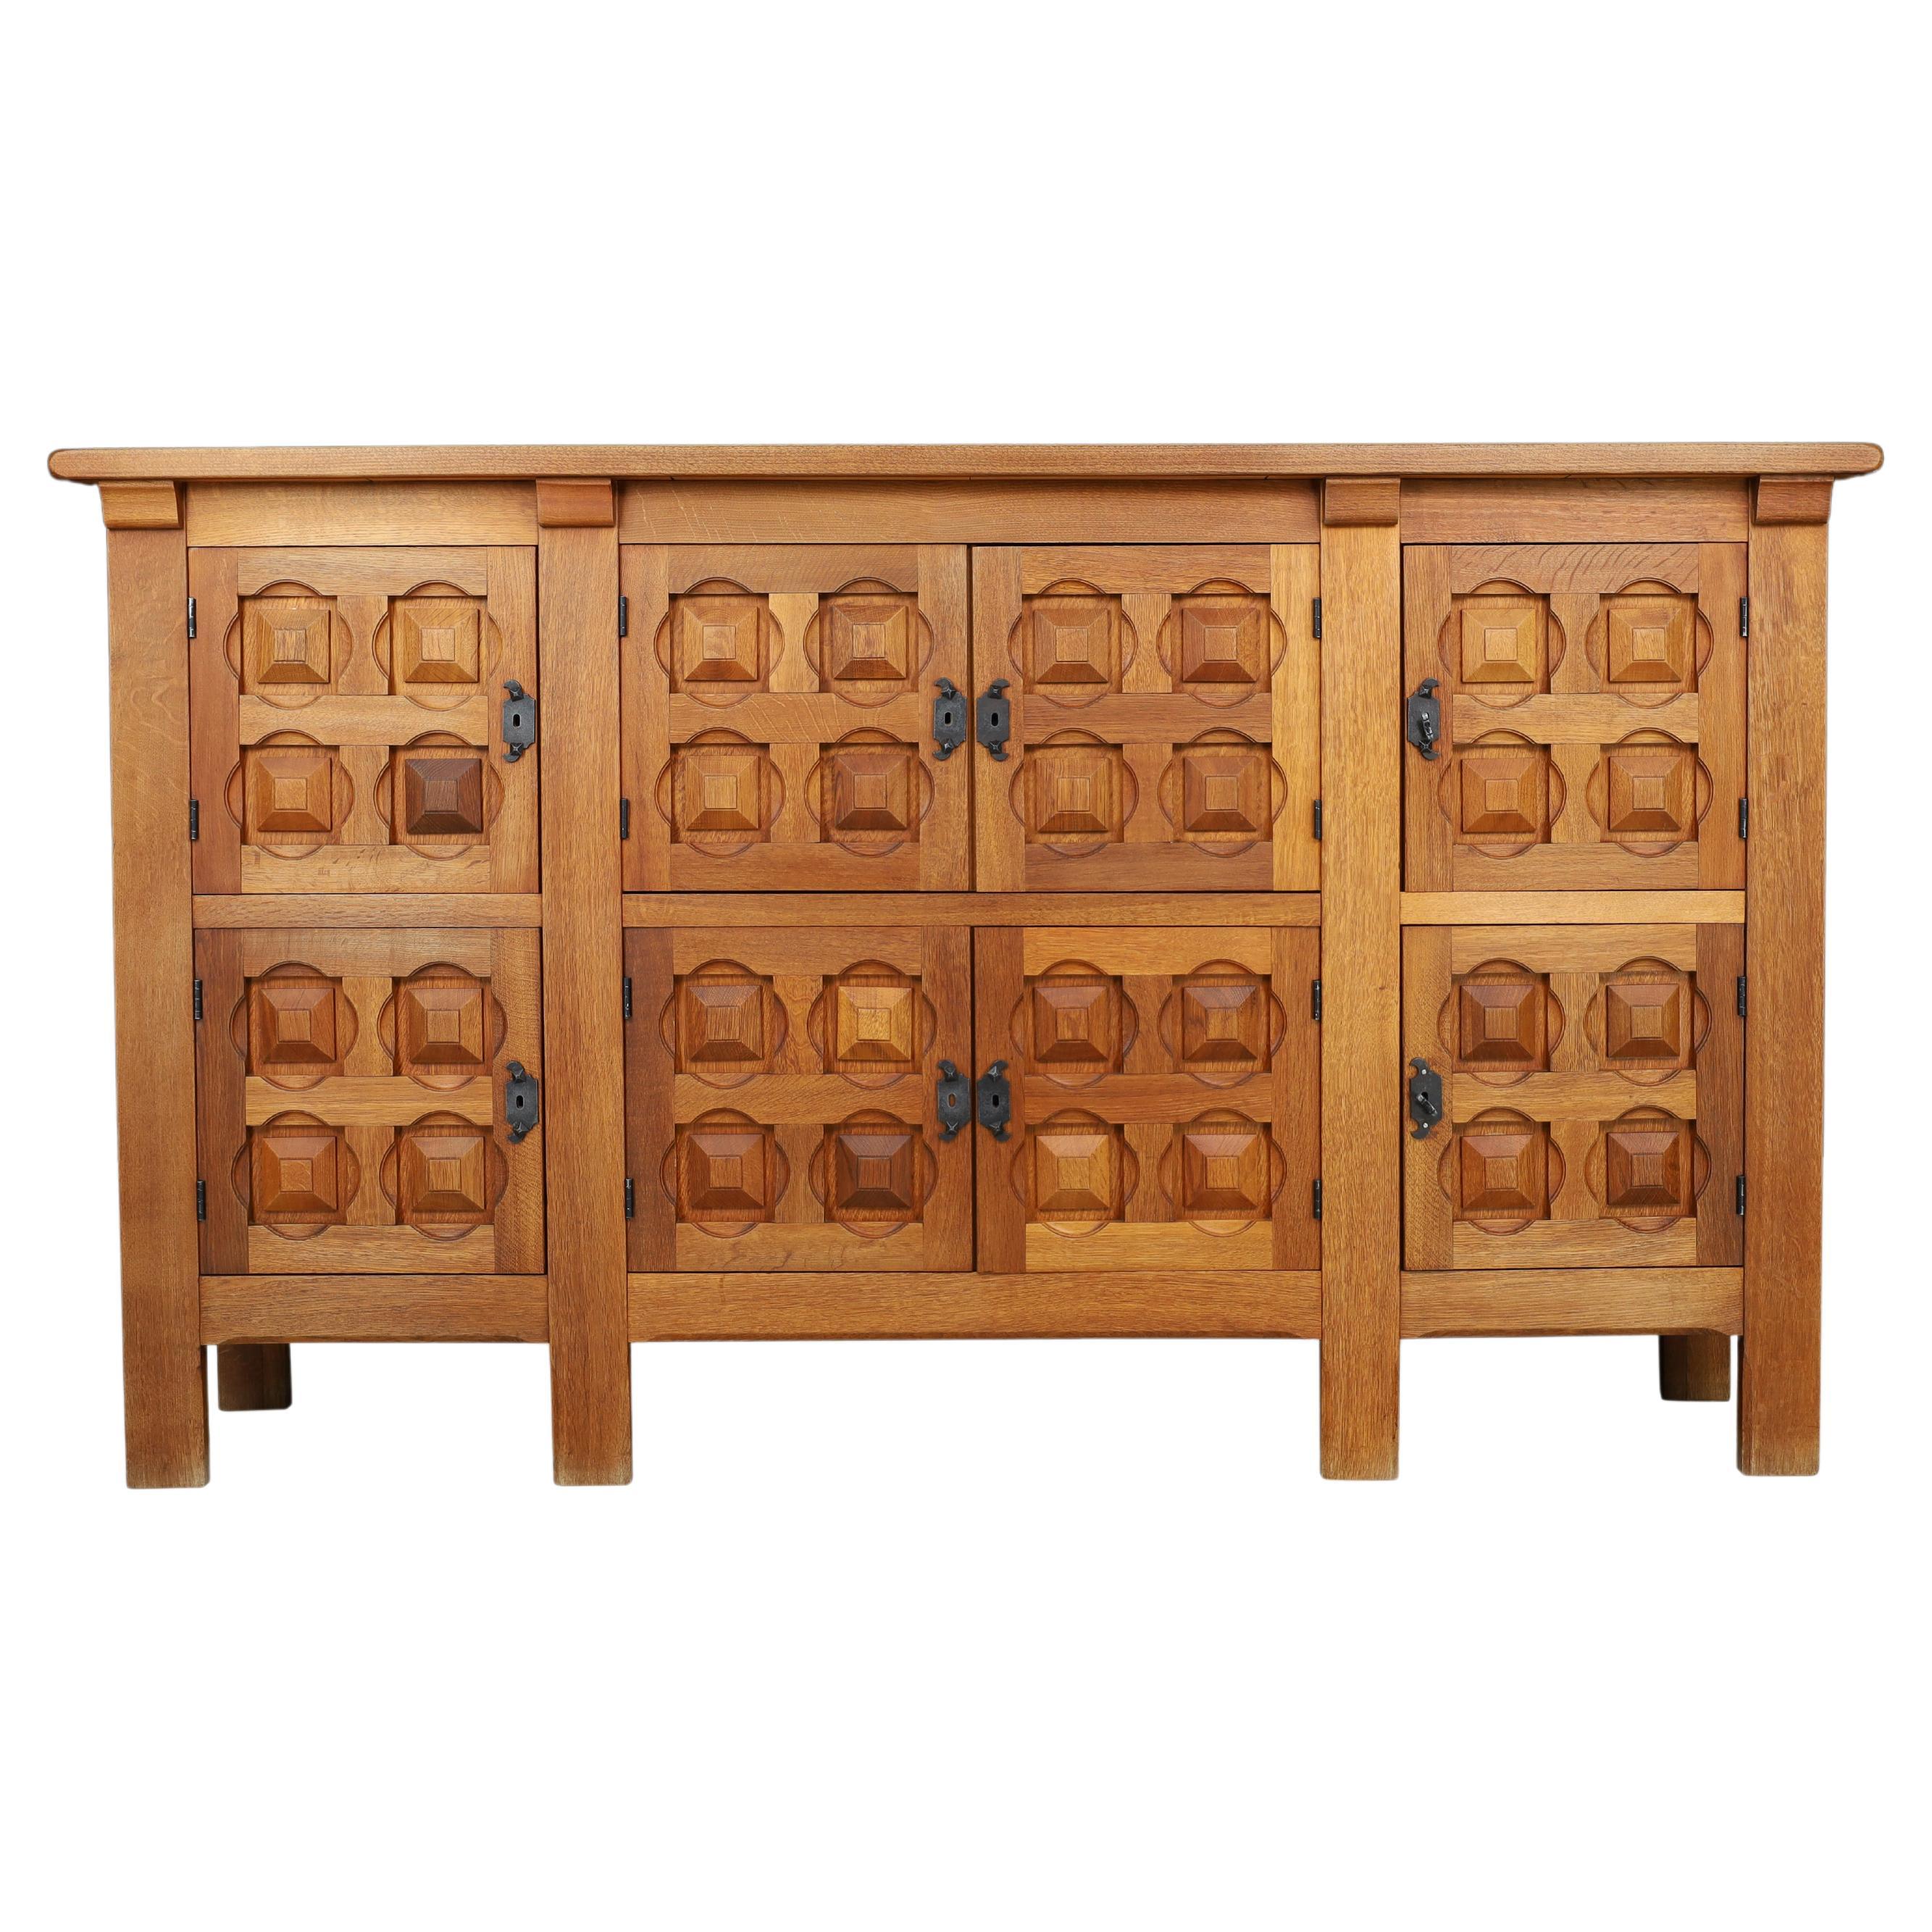 Handcrafted Solid Oak Credenza with Wrought Iron Details Spain 1940s